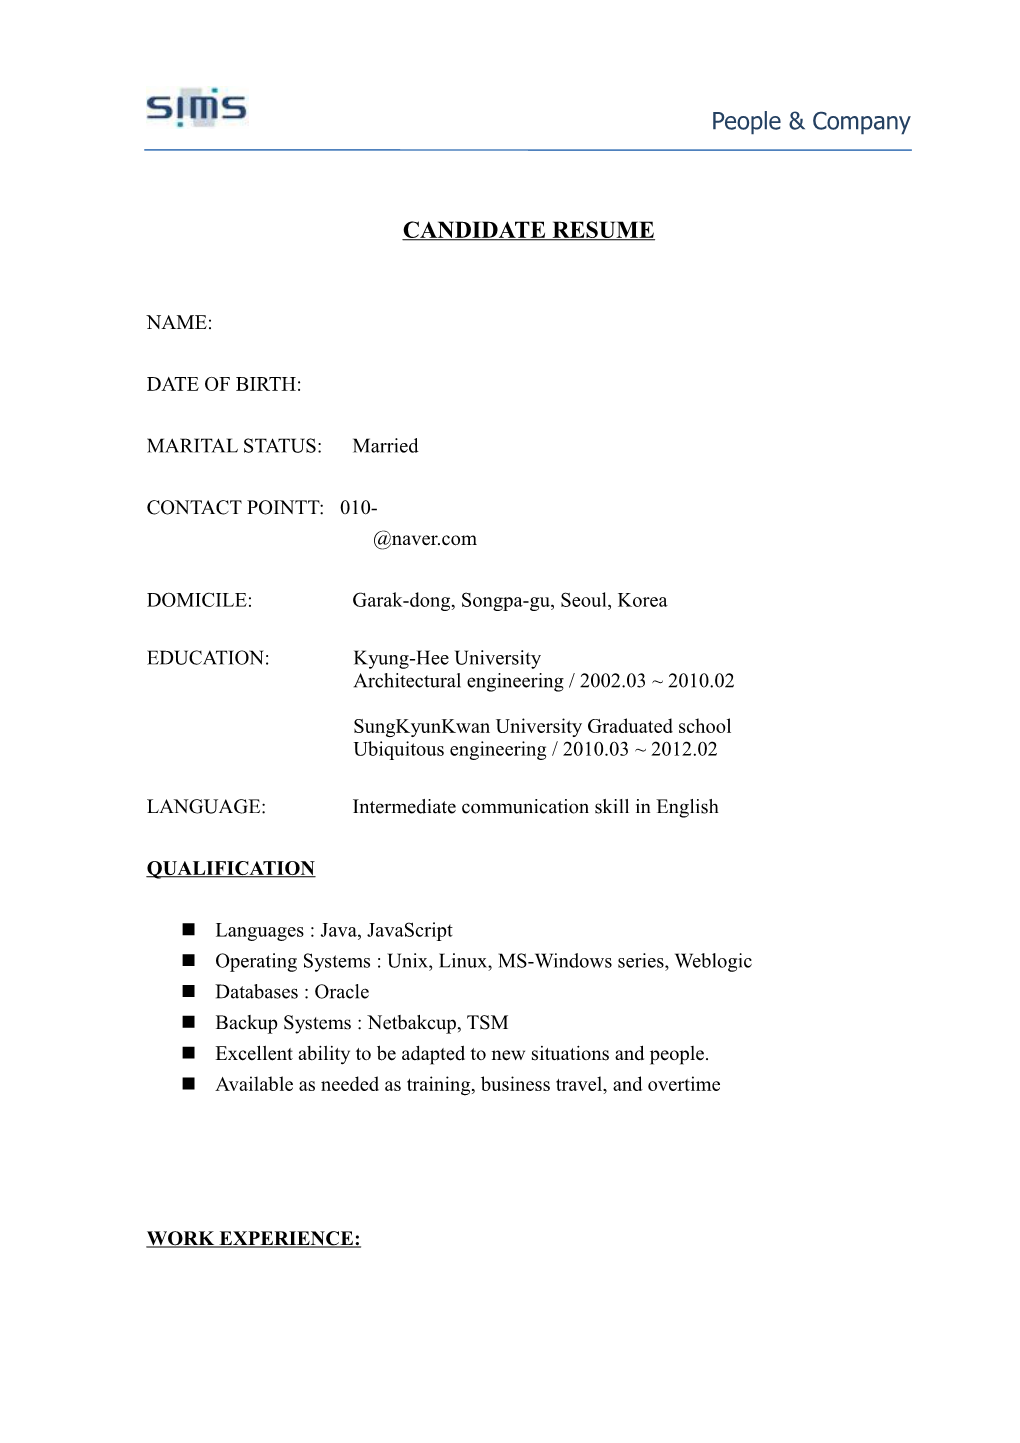 Candidate Resume